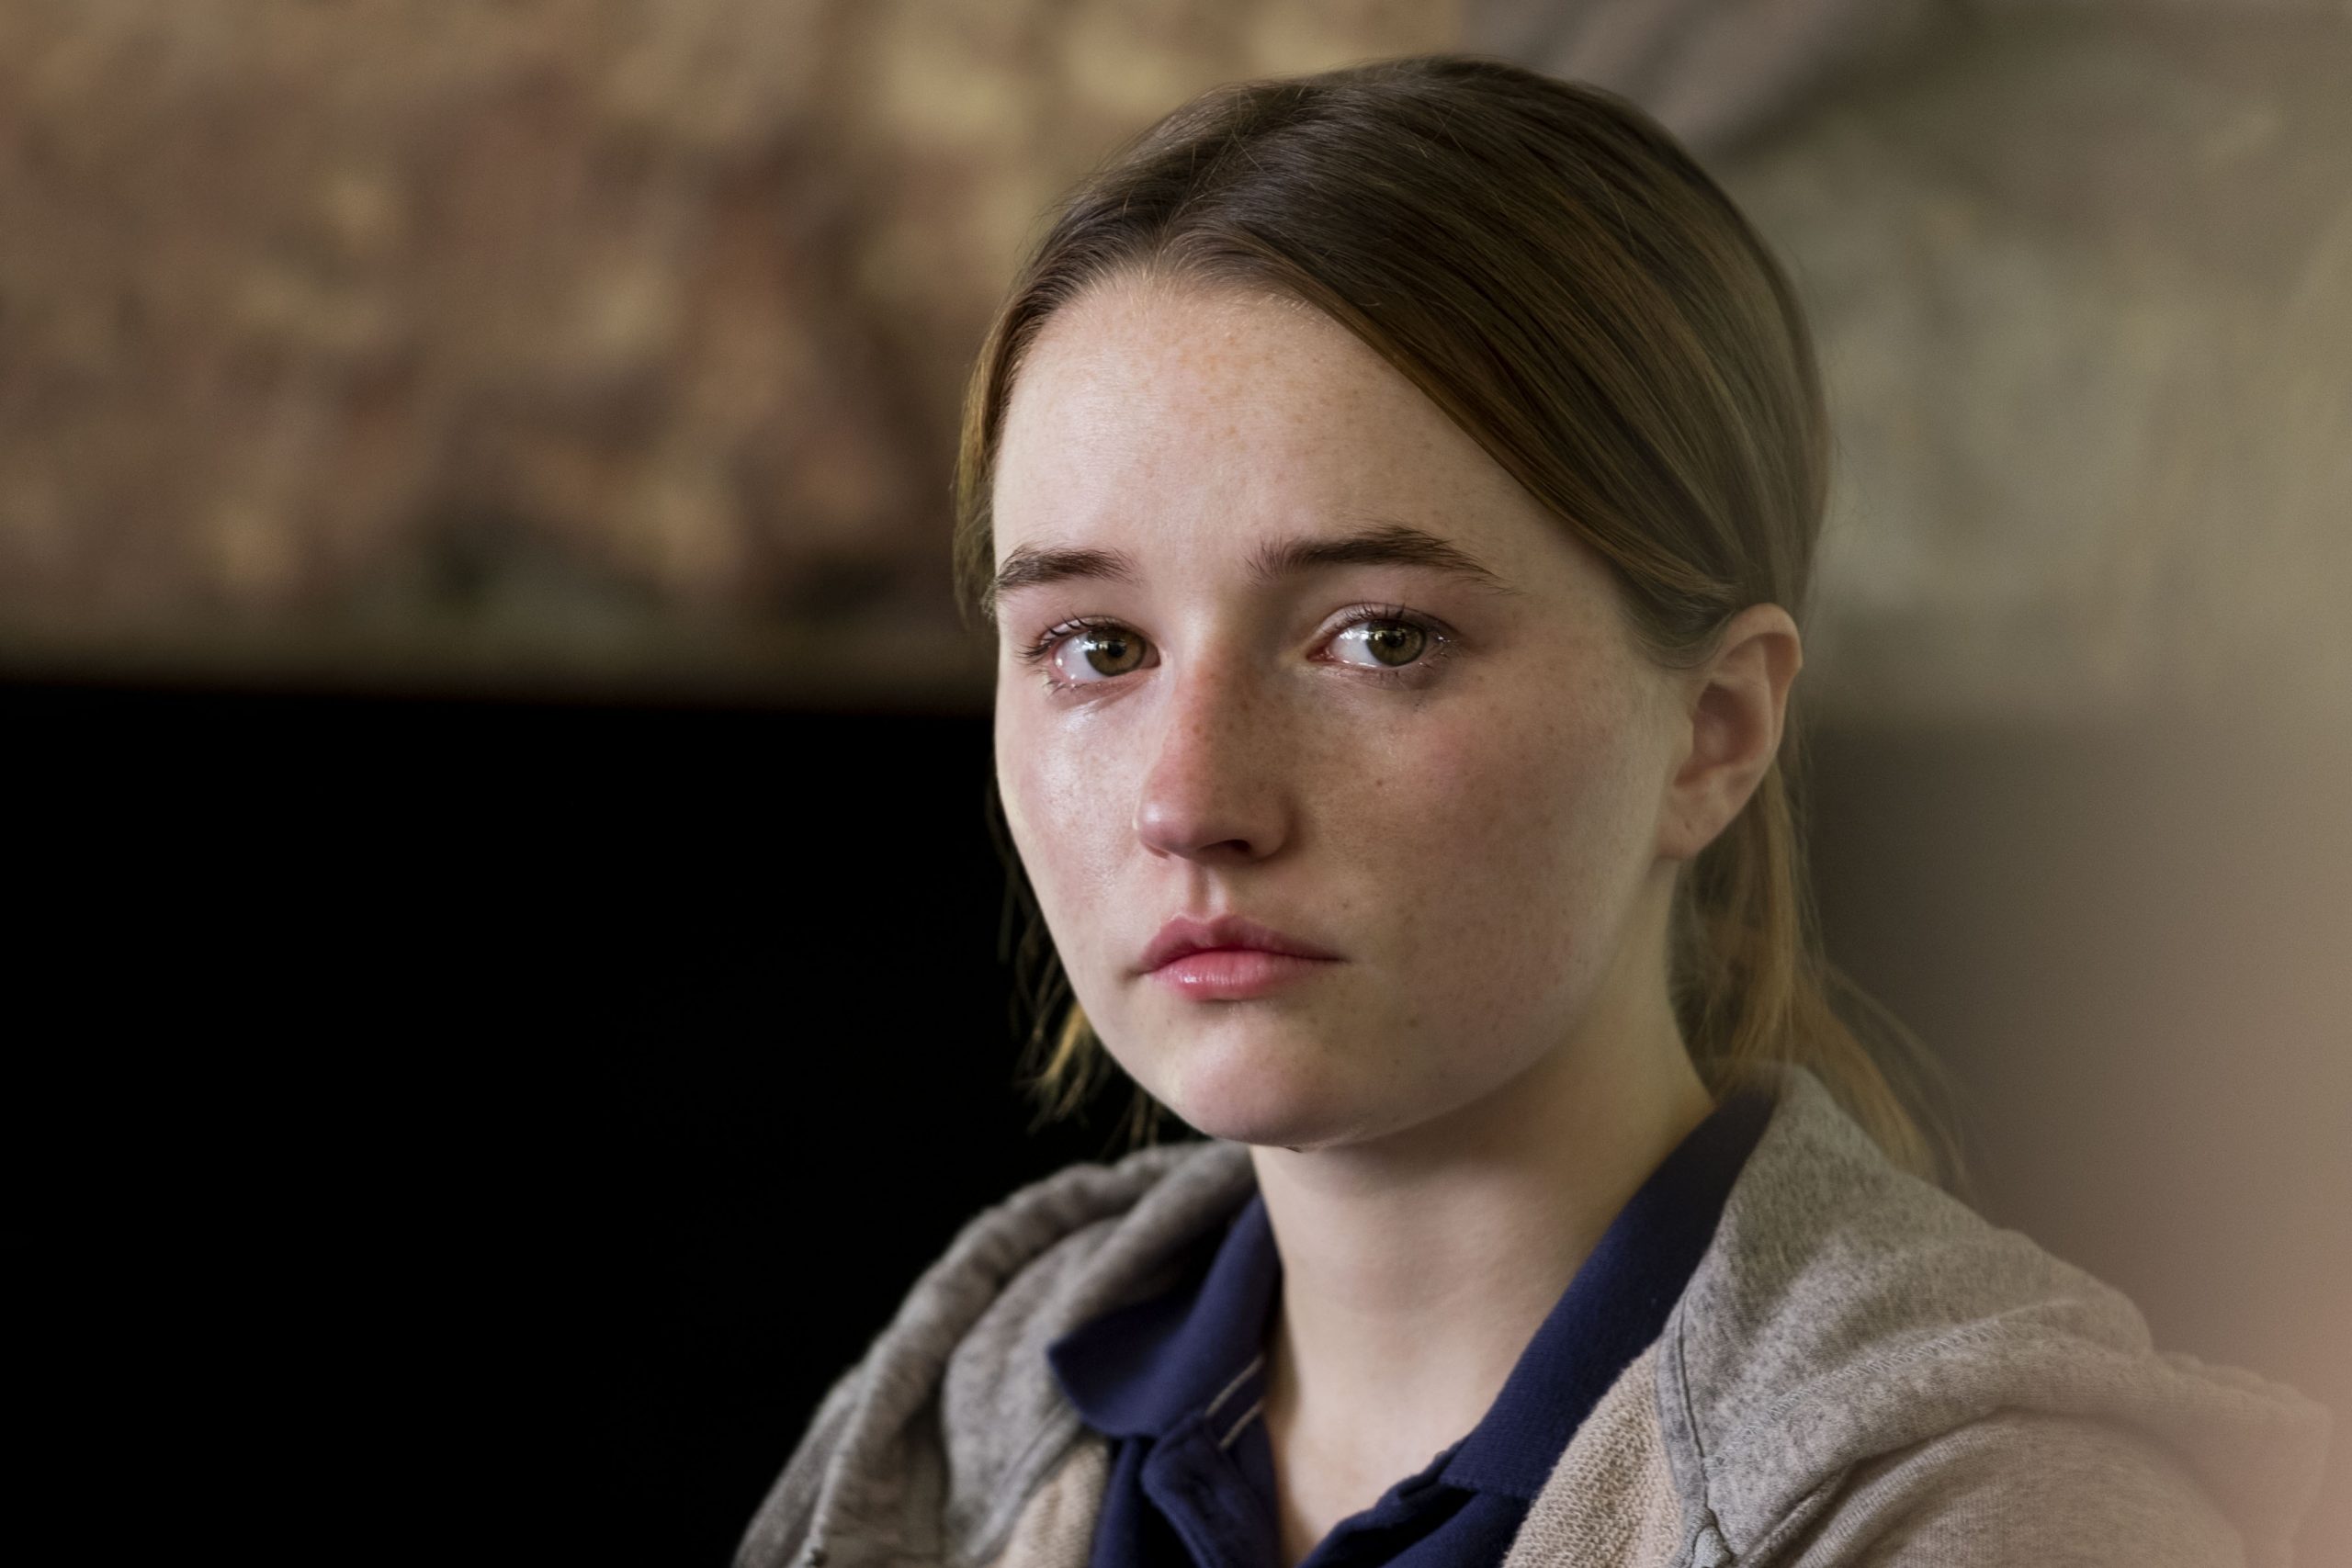 Kaitlyn Dever as her character Marie Adler from the Netflix show 'Unbelievable'.